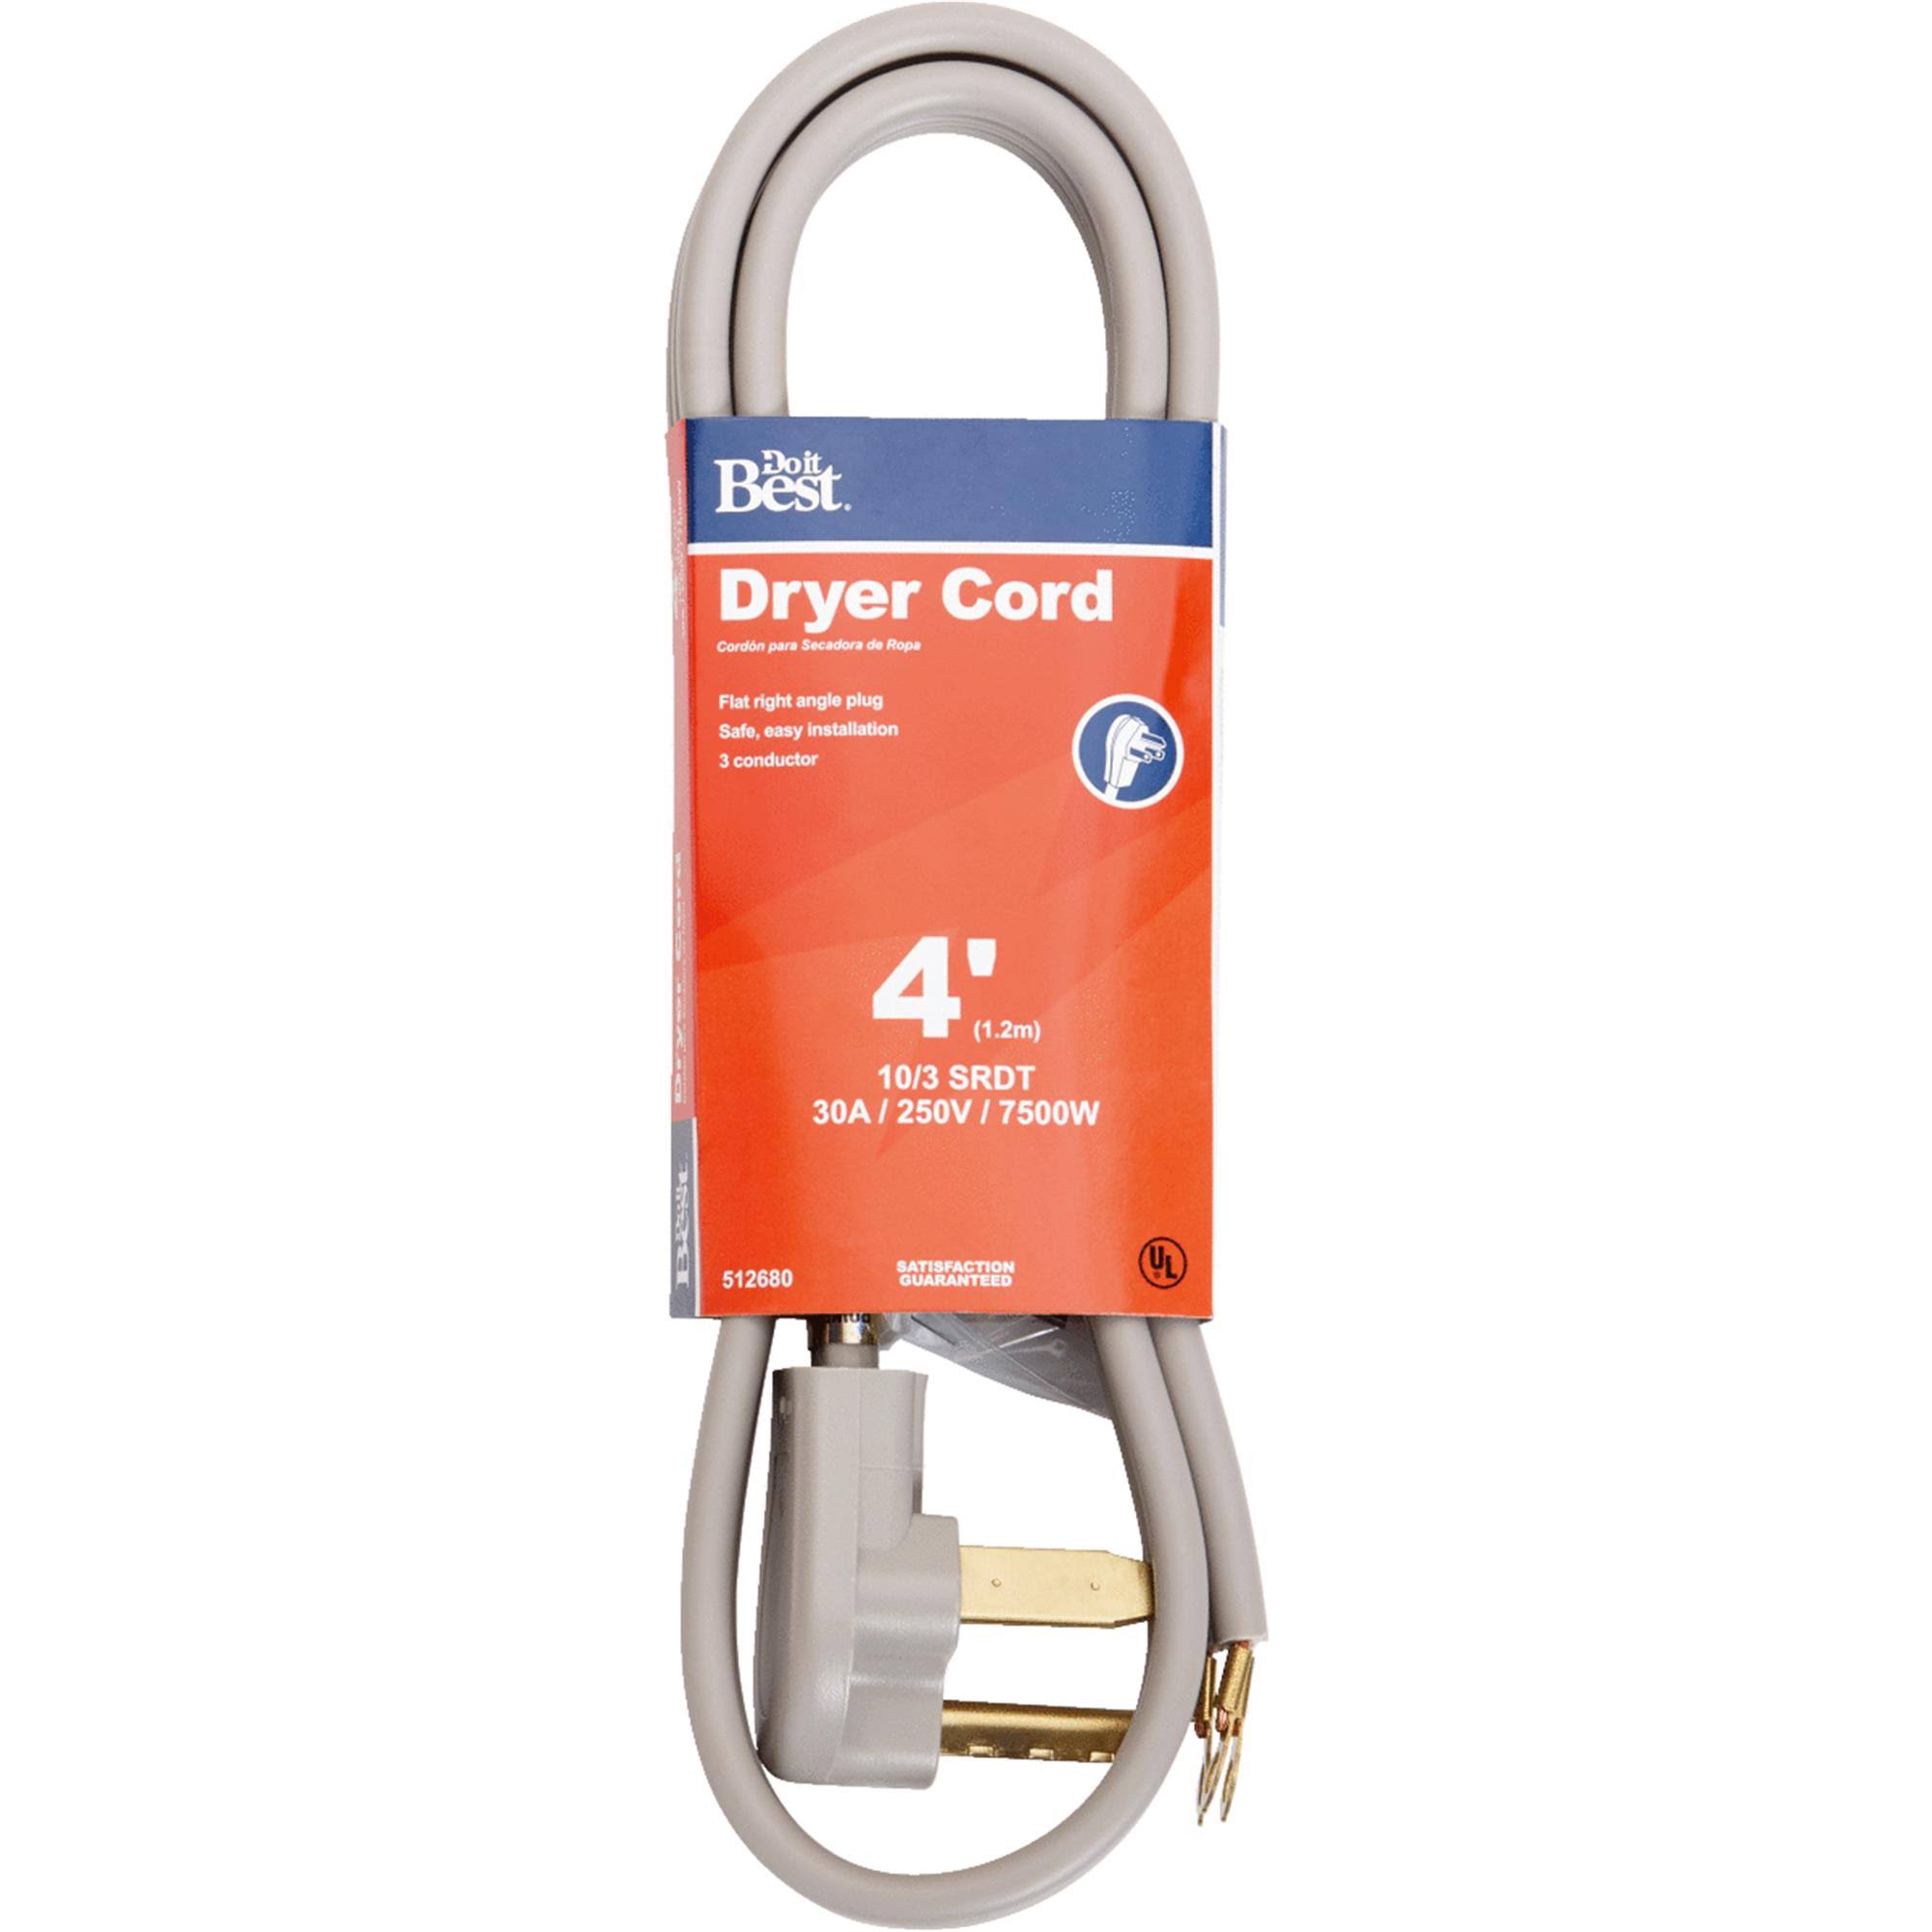 Do it Dryer Cord - 30A, 4'